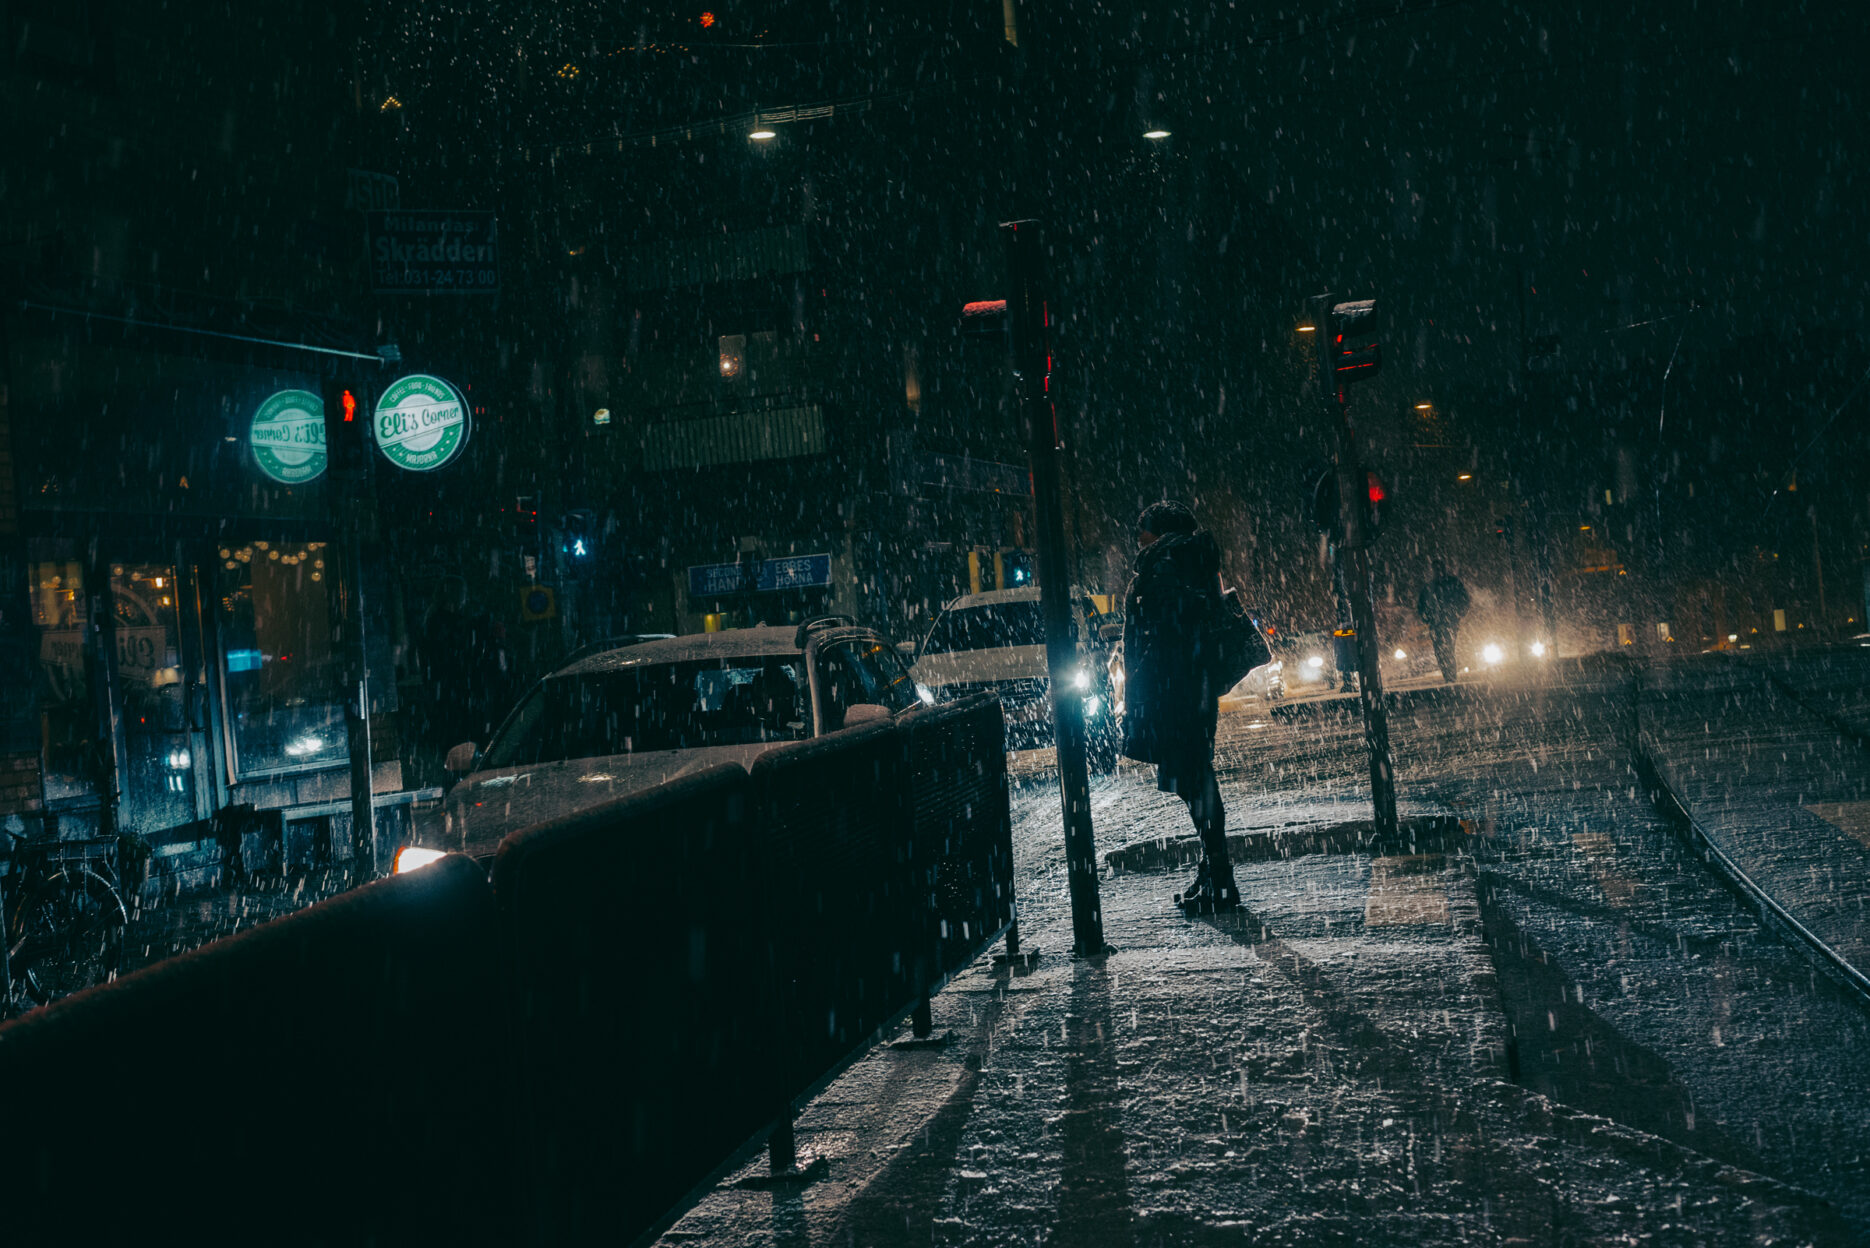 Snow falling over person standing at a pedestrian crossing